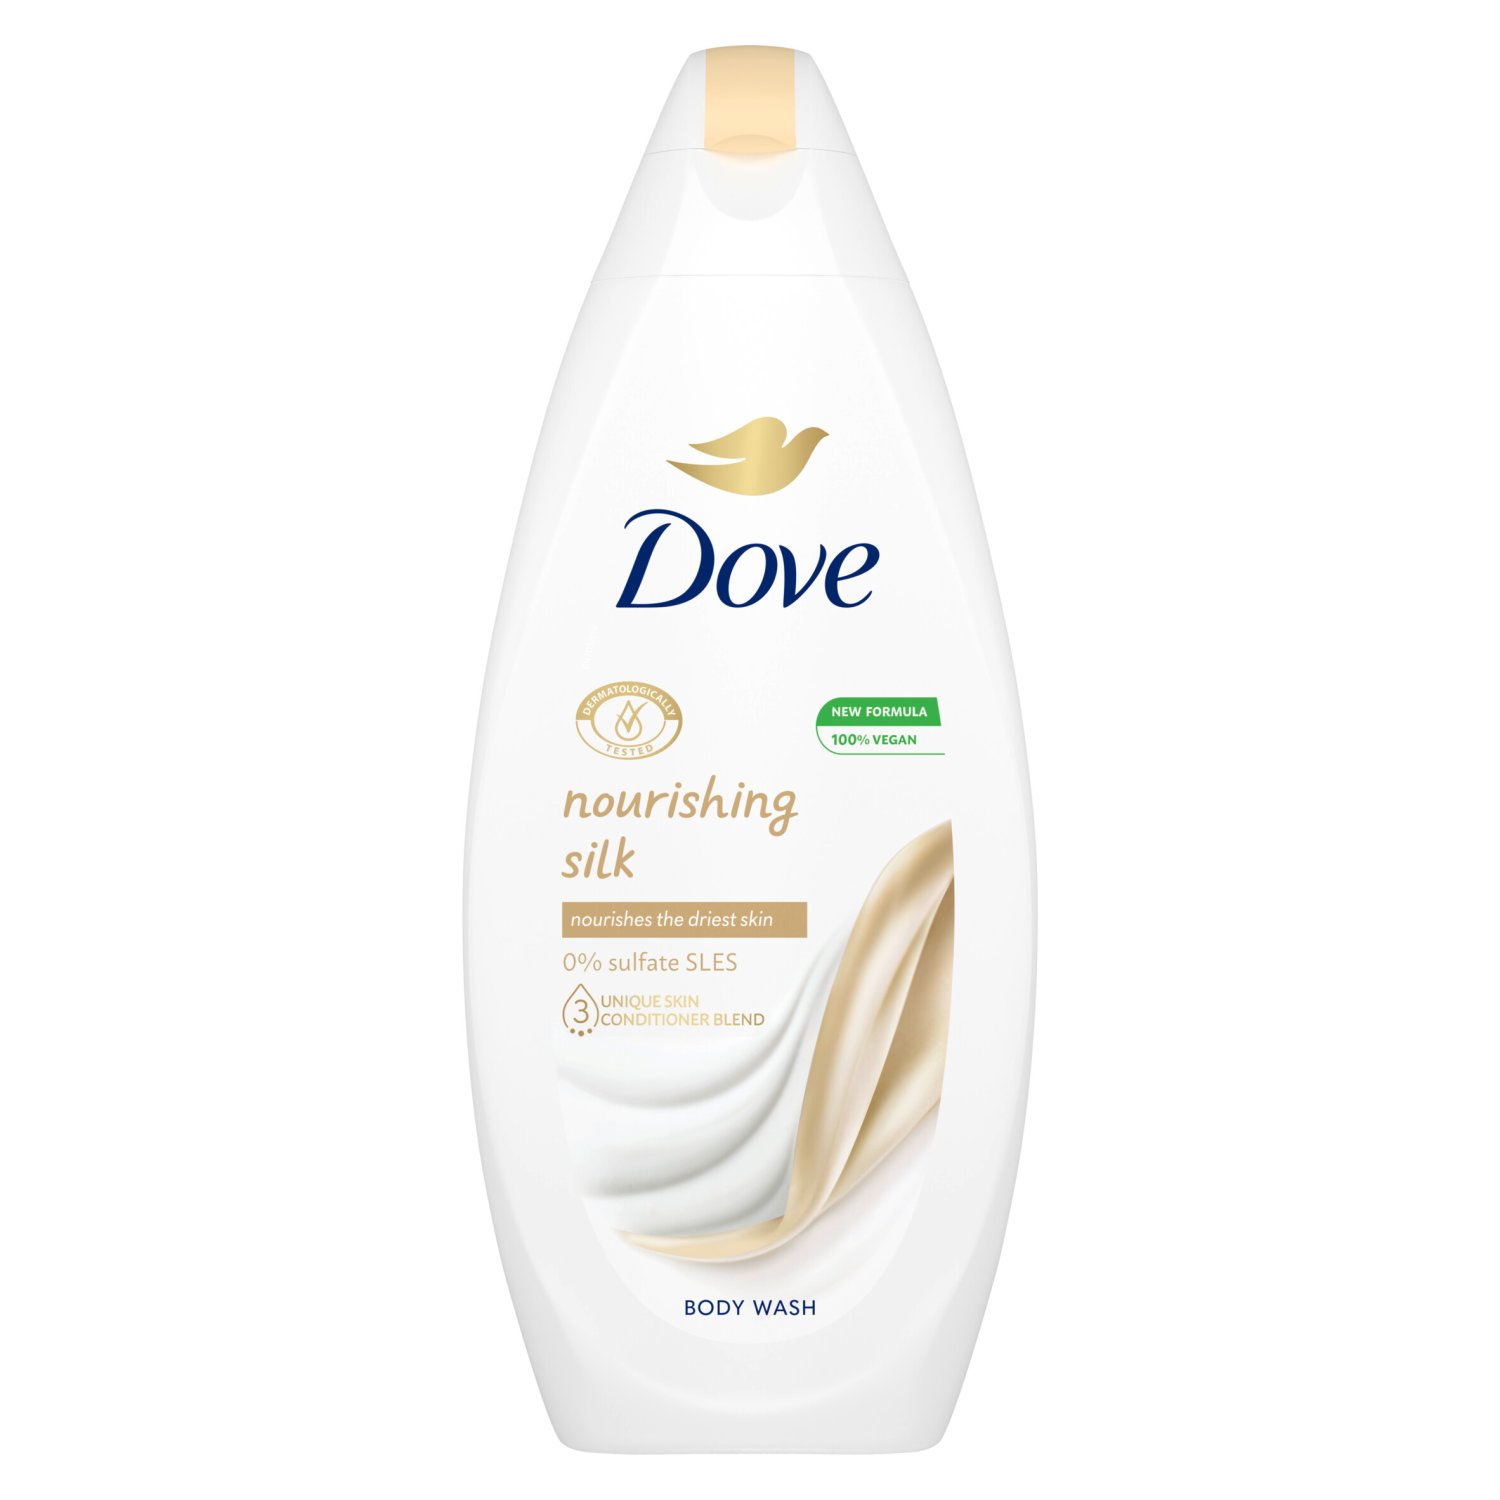 Enjoy softer, smoother skin after just one shower with the new Dove Nourishing Silk Body Wash, blending all the nourishing care you love from Dove in a lightweight, 92% biodegradable* formula. This ultra-moisturising and microbiome-gentle body cleanser is soap and sulphate SLES free and formulated with Triple Moisture Serum to provide instant softness and lasting nourishment for even the driest skin. Made with a blend of naturally derived gentle cleansers and plant-based moisturisers, Dove Nourishing Silk Body Wash ensures your microbiome (your skin’s living protective layer) is given the nutrients it needs to protect itself and minimise skin dryness. This silky and light body wash helps to soothe your senses as you shower while leaving your skin silky soft and delicately fragranced with a luxurious floral scent. For best results, simply squeeze generously between your palms or onto a shower puff, work into a lather and massage all over your body, allowing the light lather to soothe your skin before rinsing thoroughly. Use this nourishing body wash as part of your daily shower routine for softer, smoother skin. Dove believes no young person should be held back from reaching their full potential. Since 2004, Dove has been building self-esteem and confidence in young people – and by 2030, they’ll have helped ¼ billion young people through their educational programmes and resources. *OECD test methods 301, 302, or 310 **within the stratum corneum